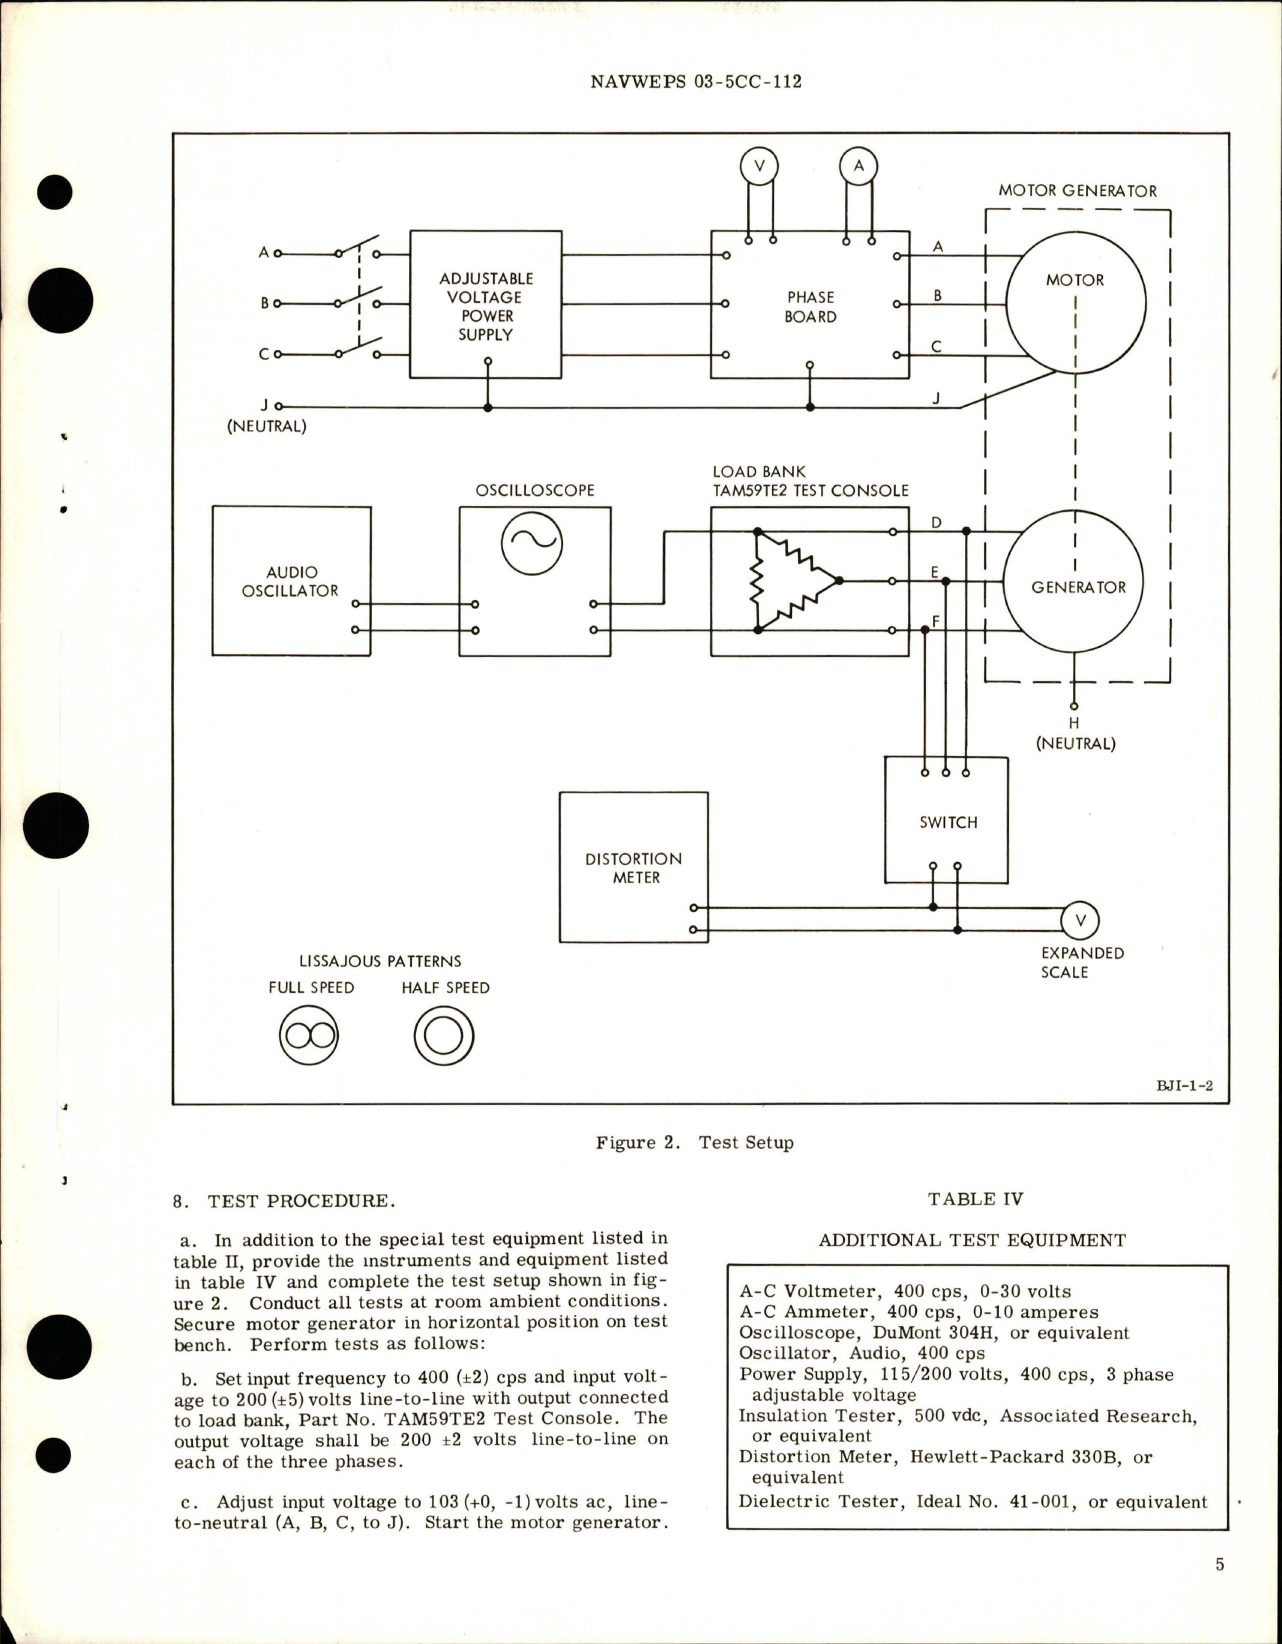 Sample page 5 from AirCorps Library document: Overhaul Instructions with Parts Breakdown for Motor Generator - Part AM59